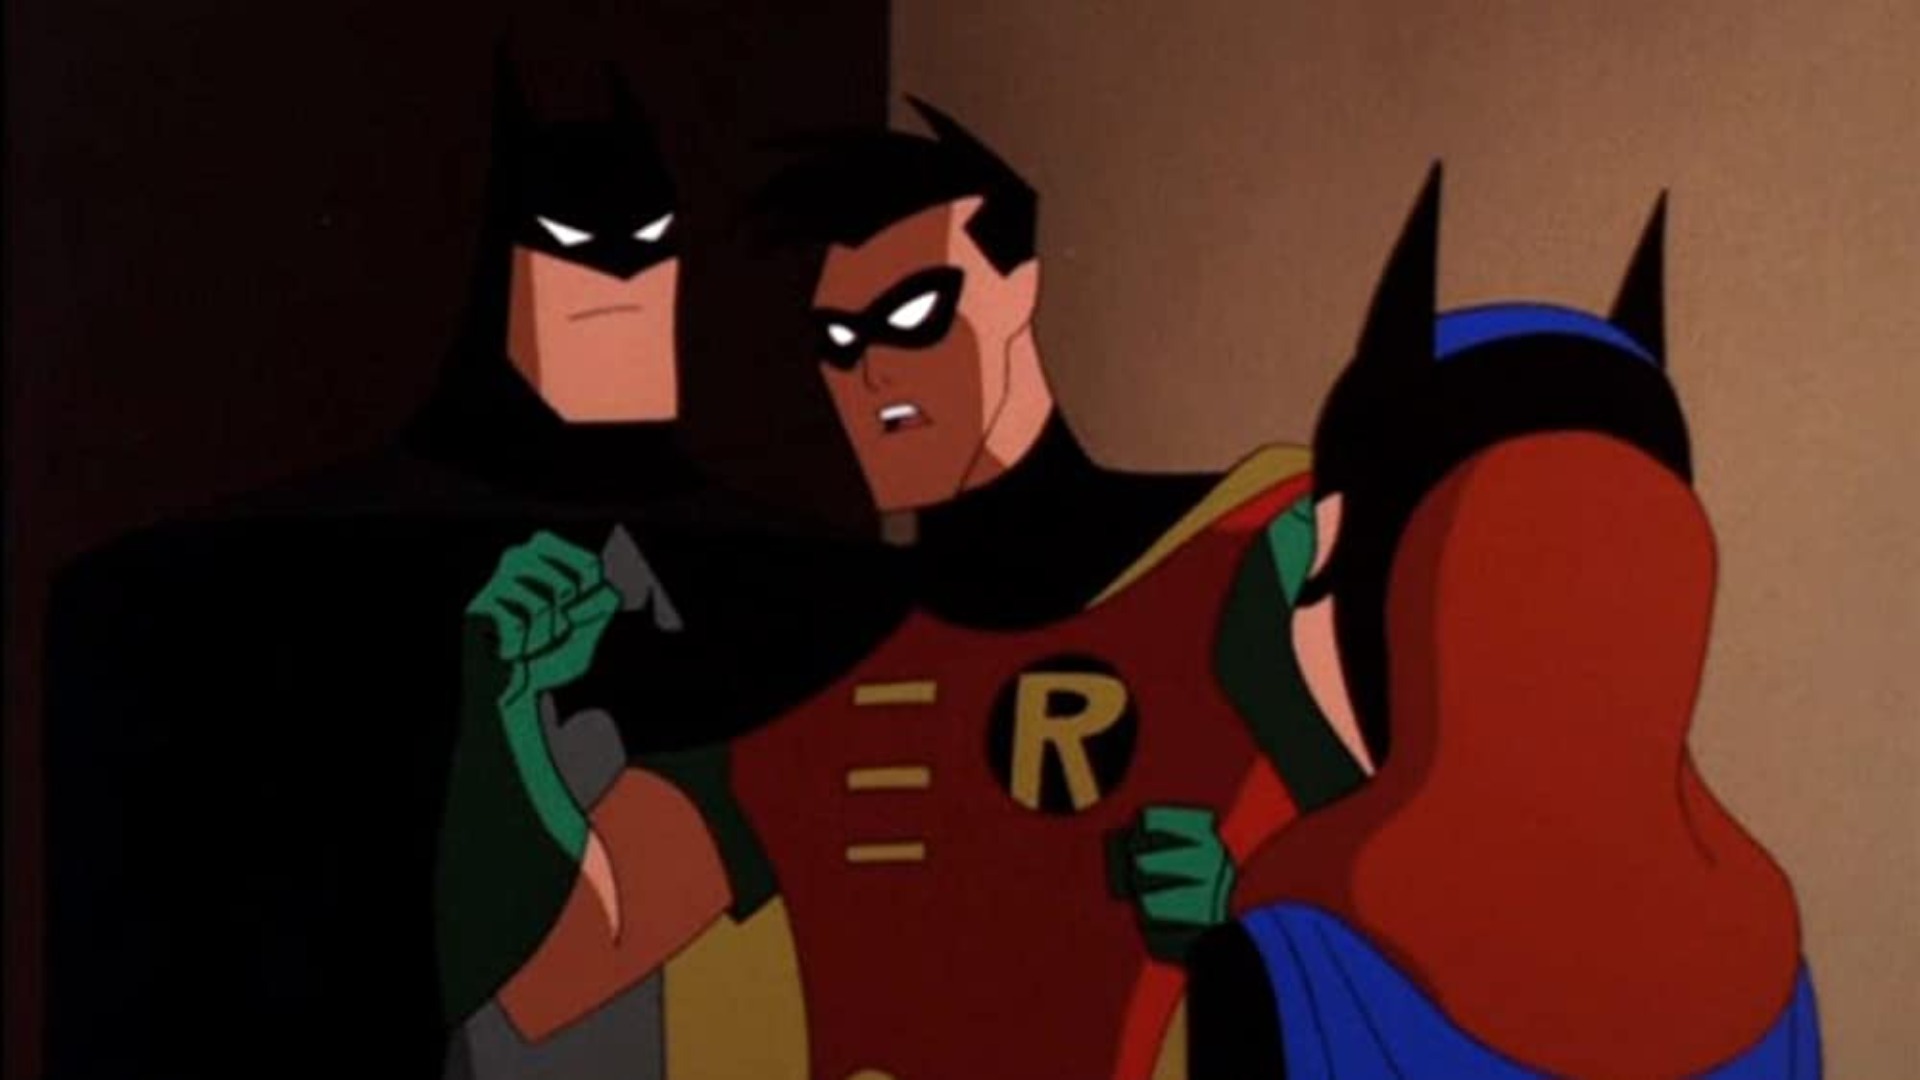 Batman: The Animated Series Is Finally Coming To HBO Max